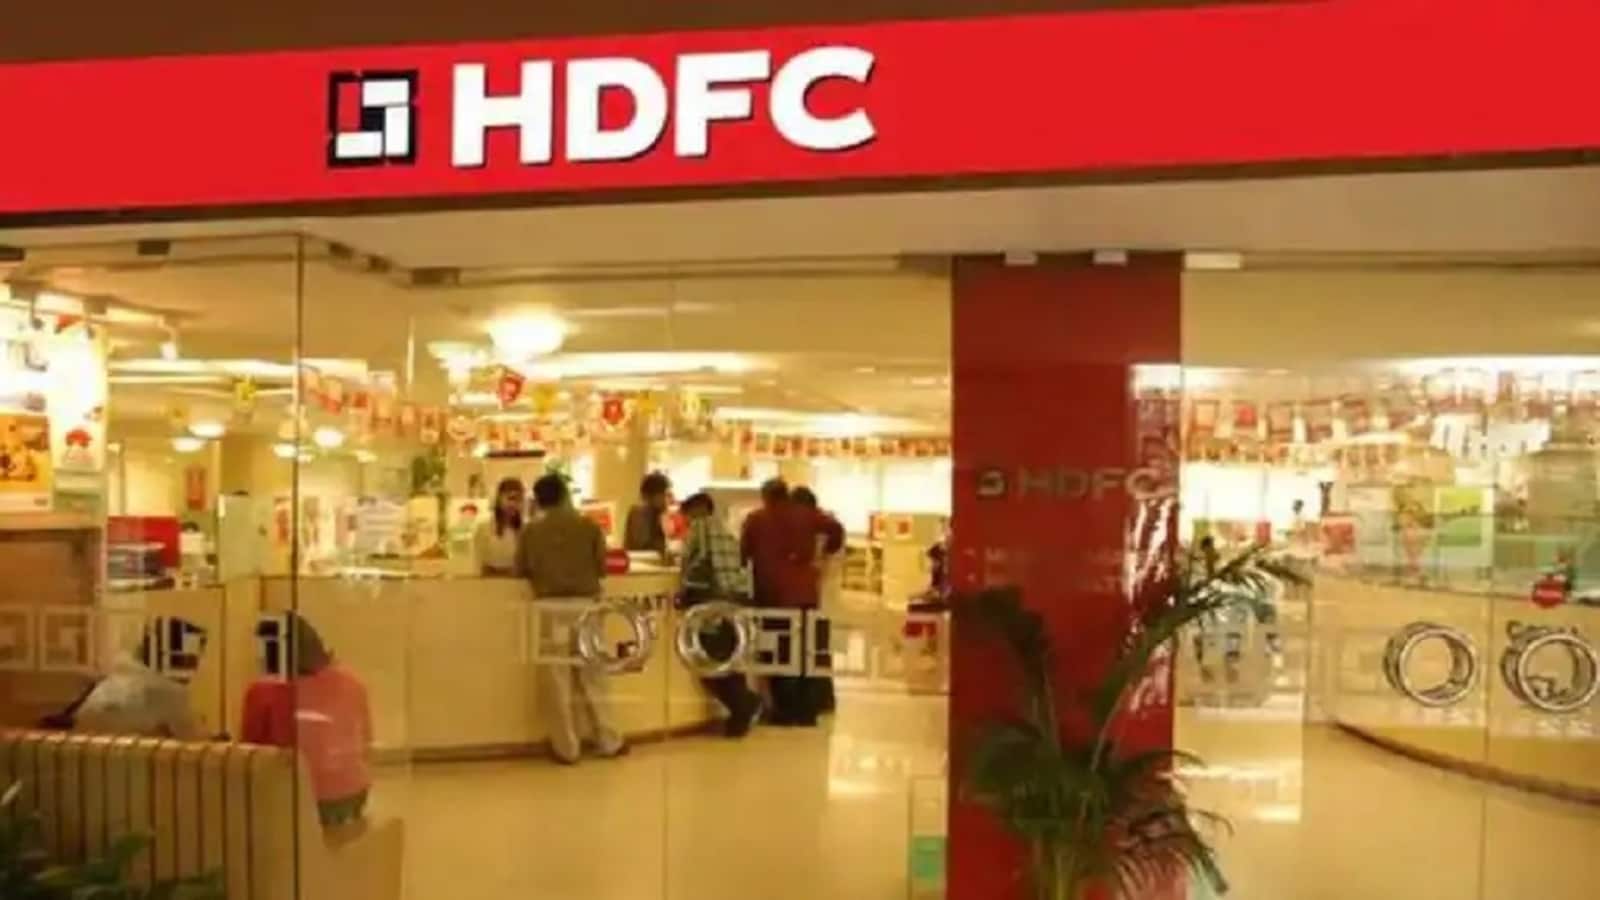 HDFC sells shares of Ansal Housing to recover dues